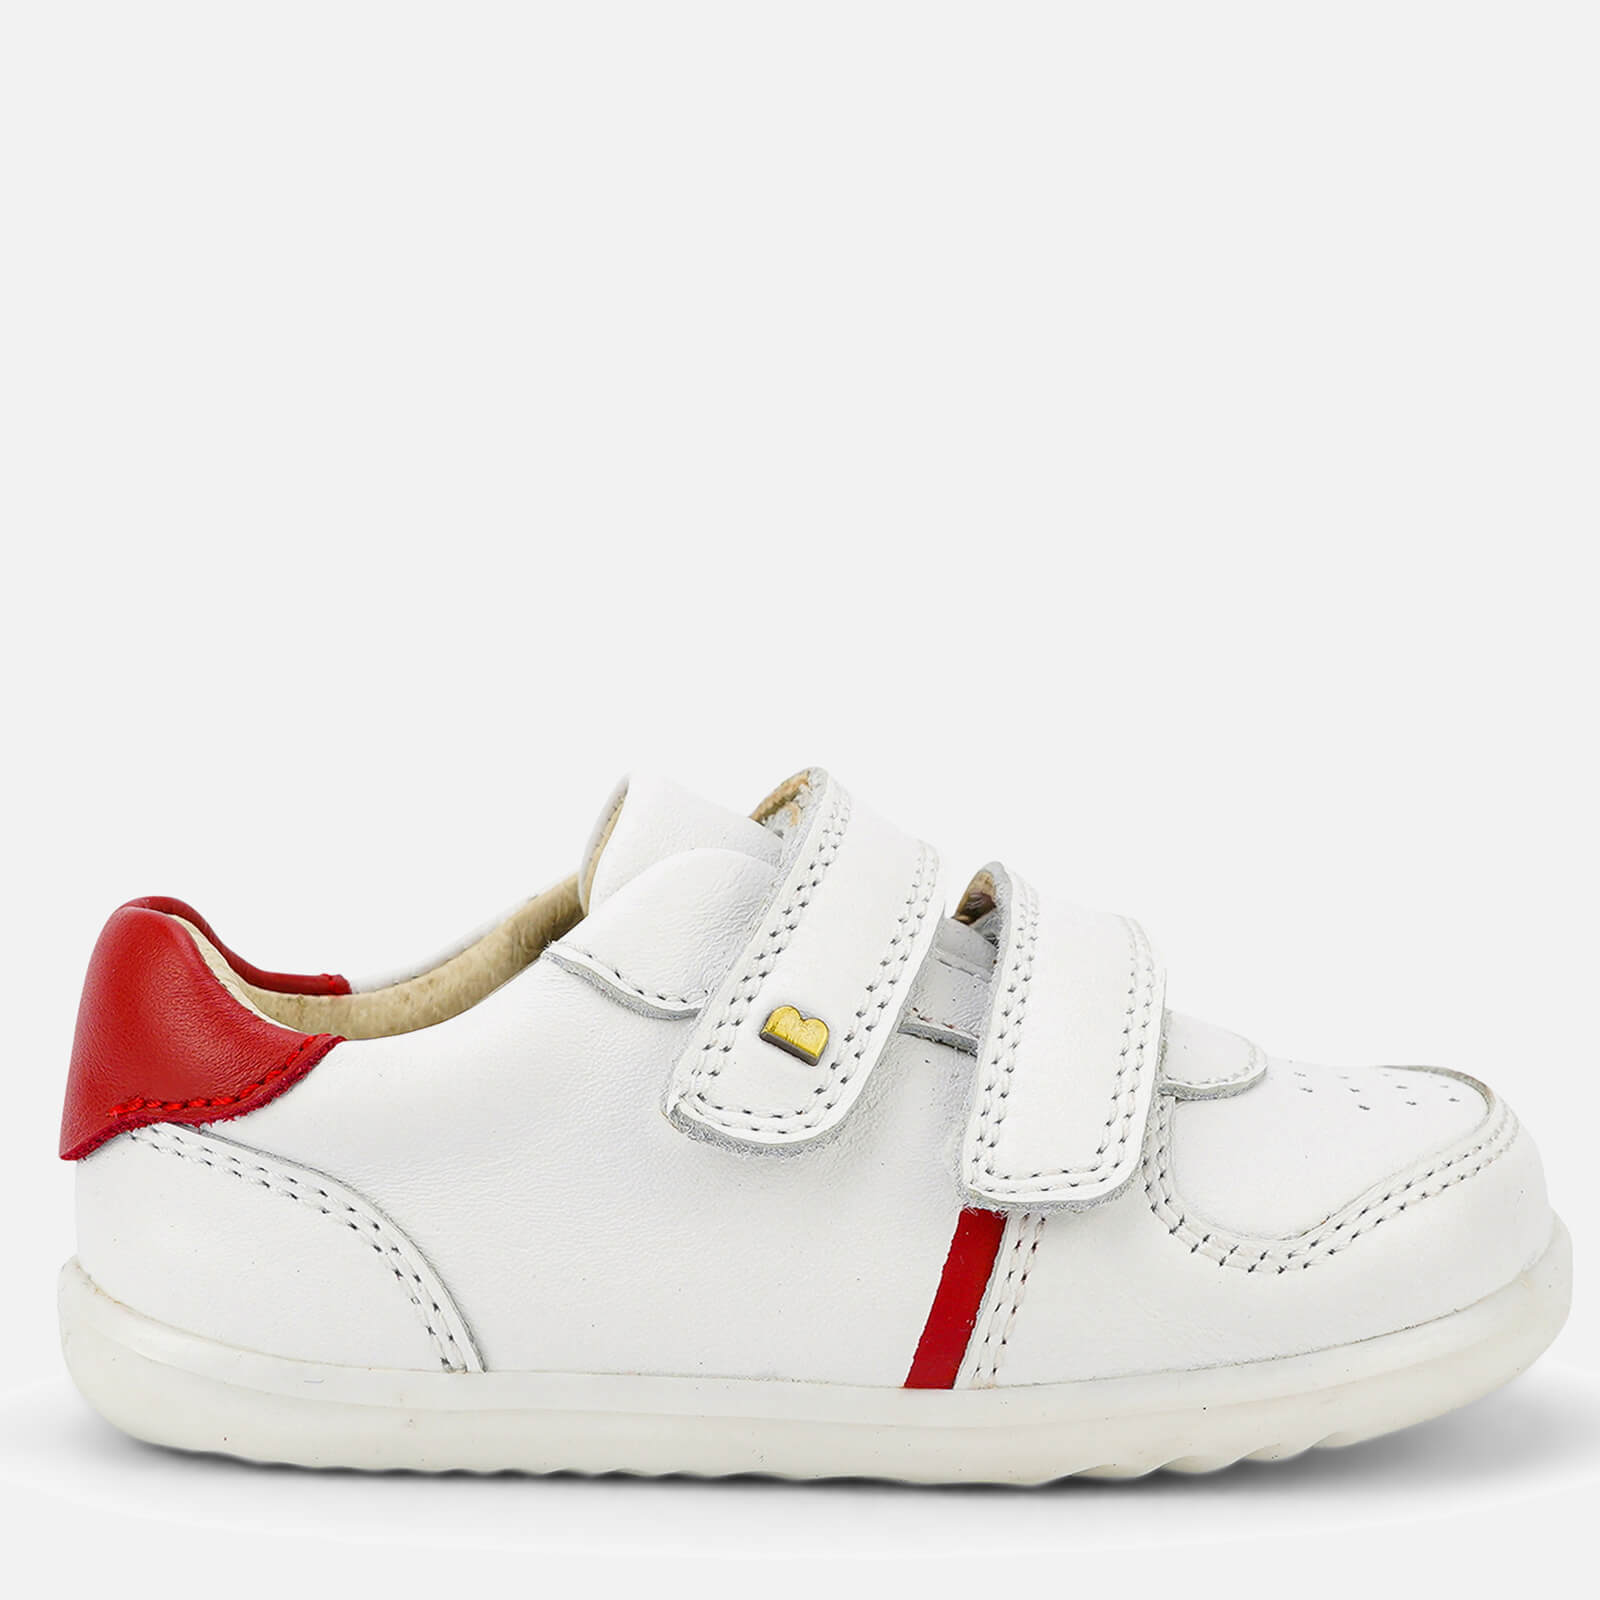 Bobux Boys' Step Up Riley Trainers - White/Red - UK 3.5 Baby